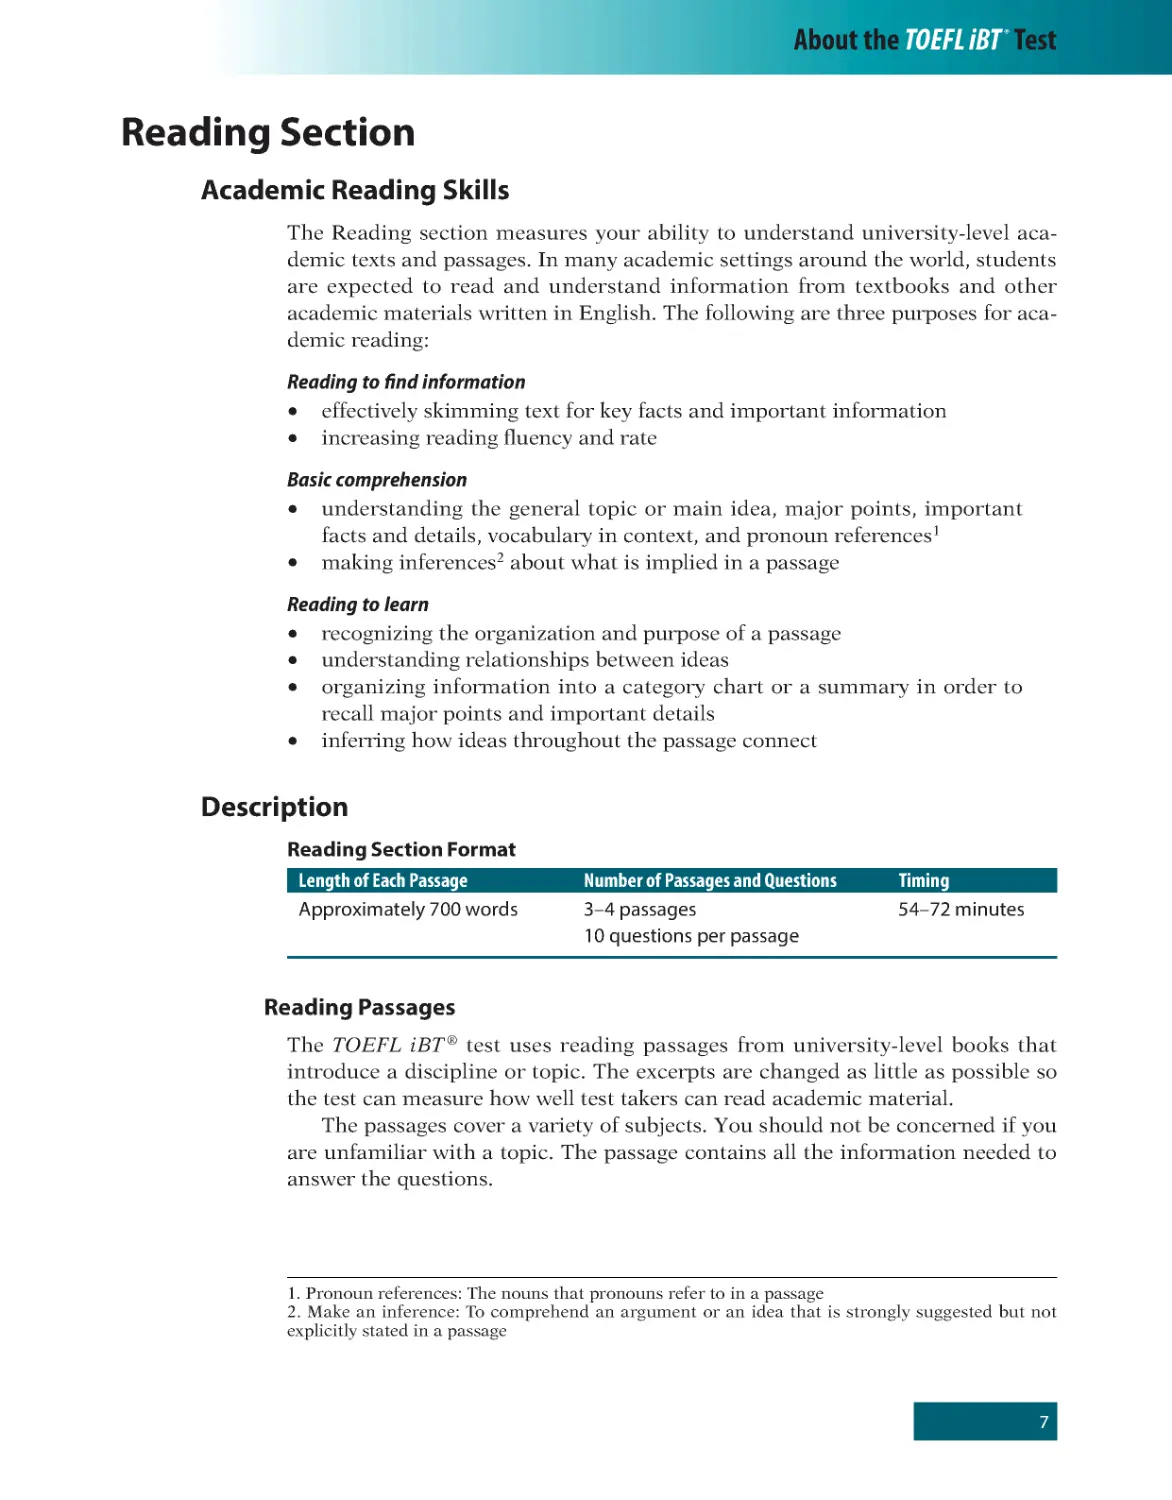 Reading Section
Basic comprehension
Reading to learn
Description
Reading Passages